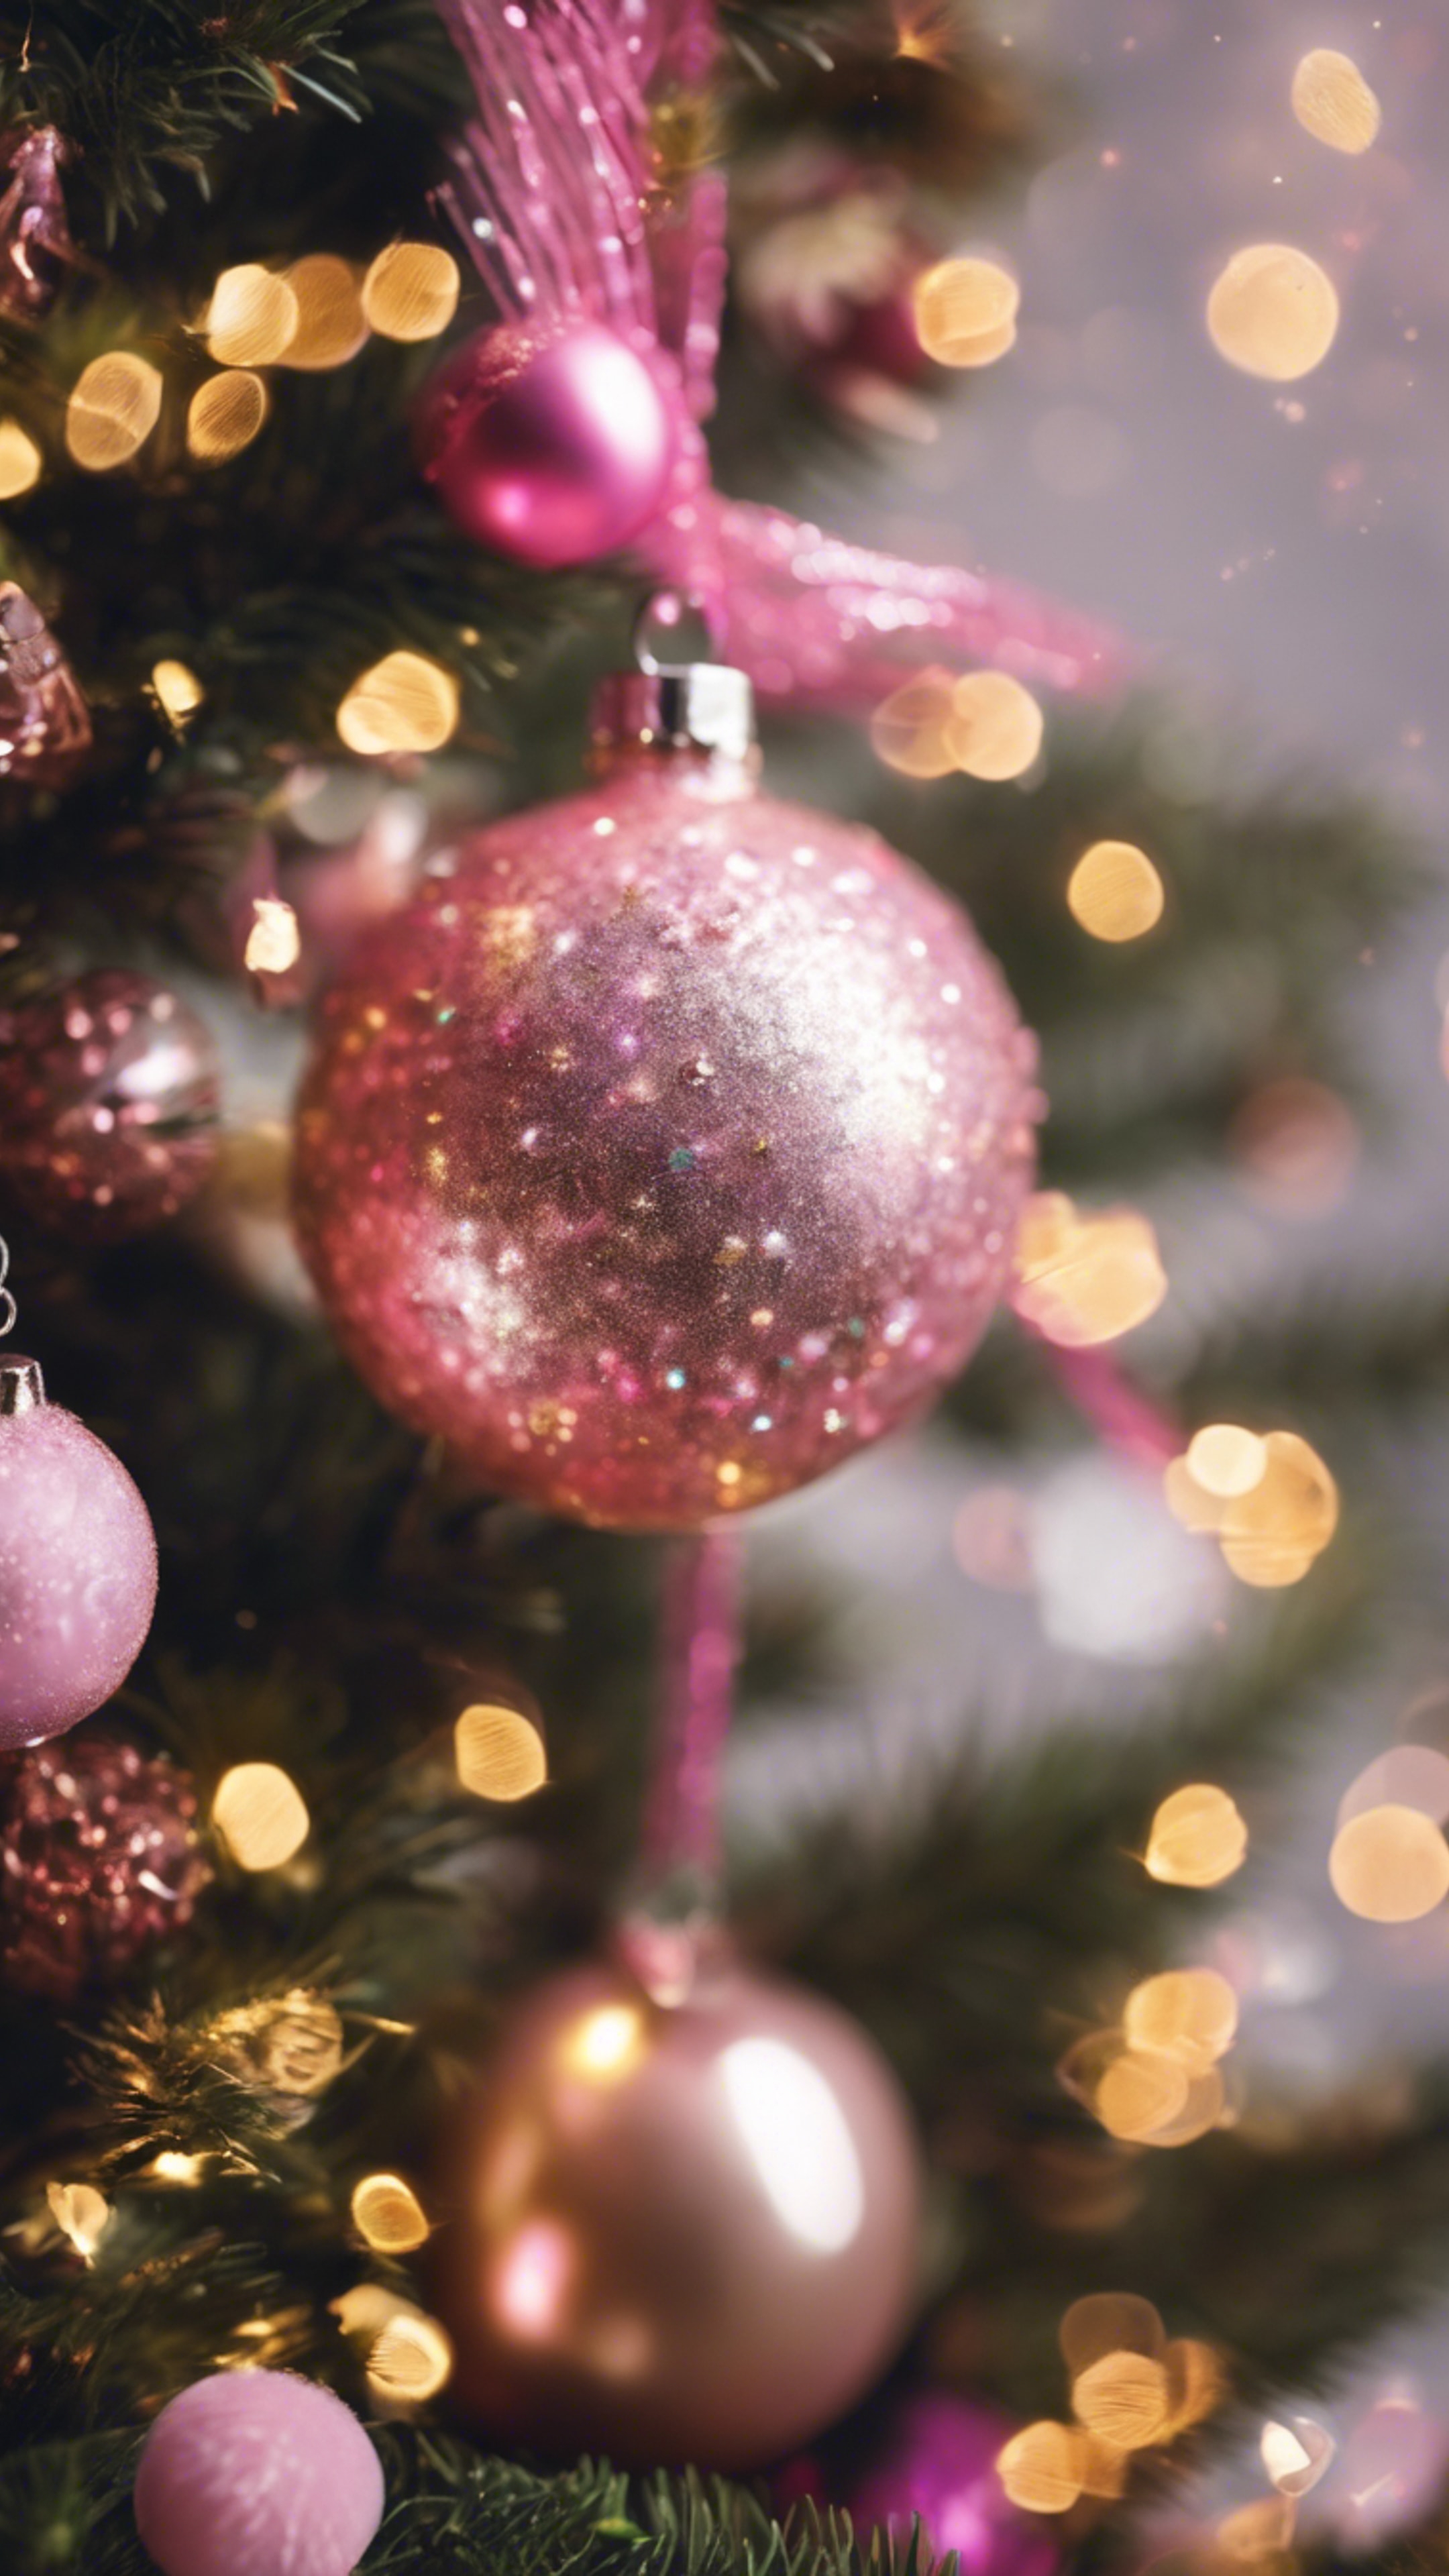 A festive Christmas tree ornamented with pink and gold baubles and glittery tinsel. Wallpaper[f12642b0ba1f422cacfa]